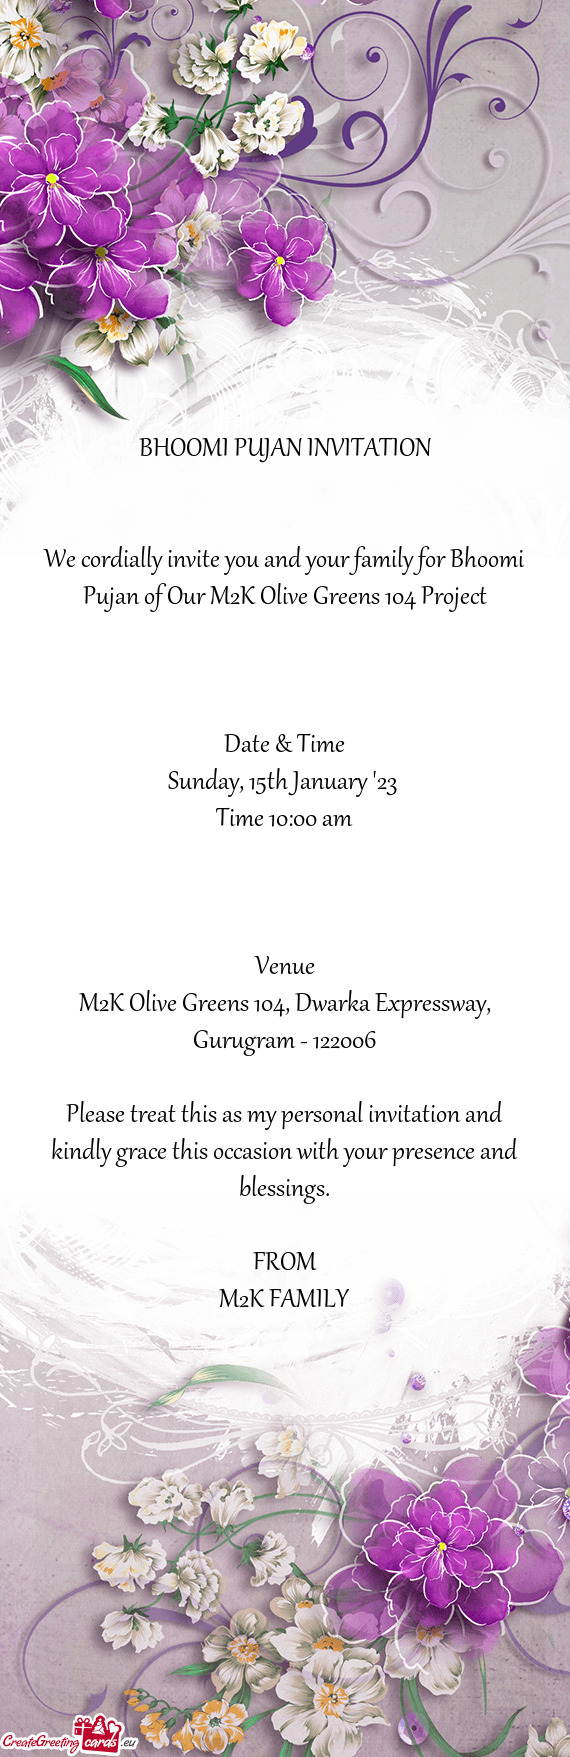 We cordially invite you and your family for Bhoomi Pujan of Our M2K Olive Greens 104 Project